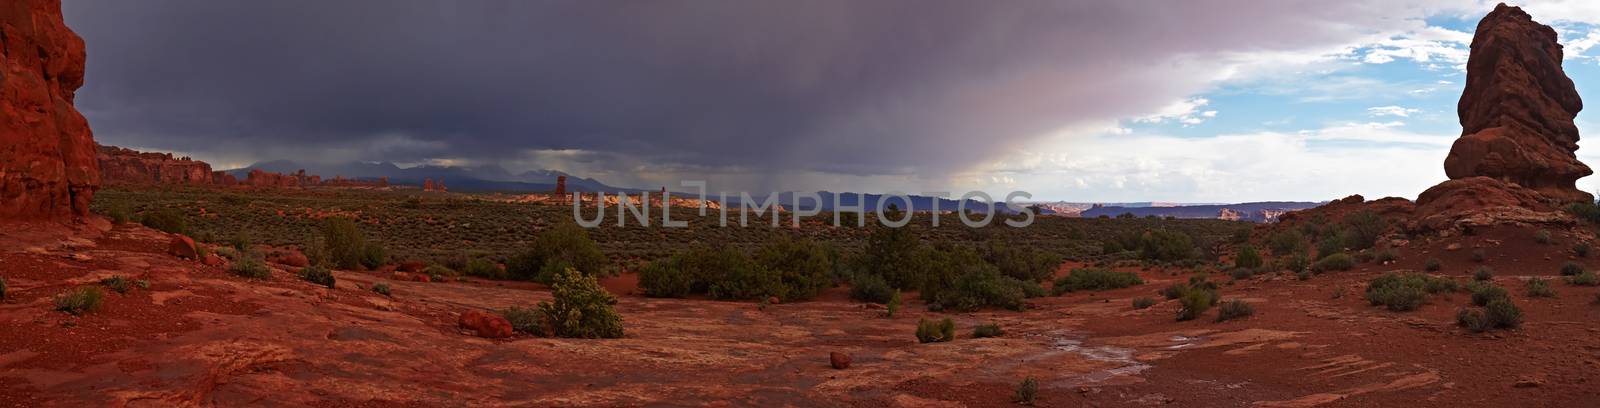 Desert after the Storm panorama by LoonChild